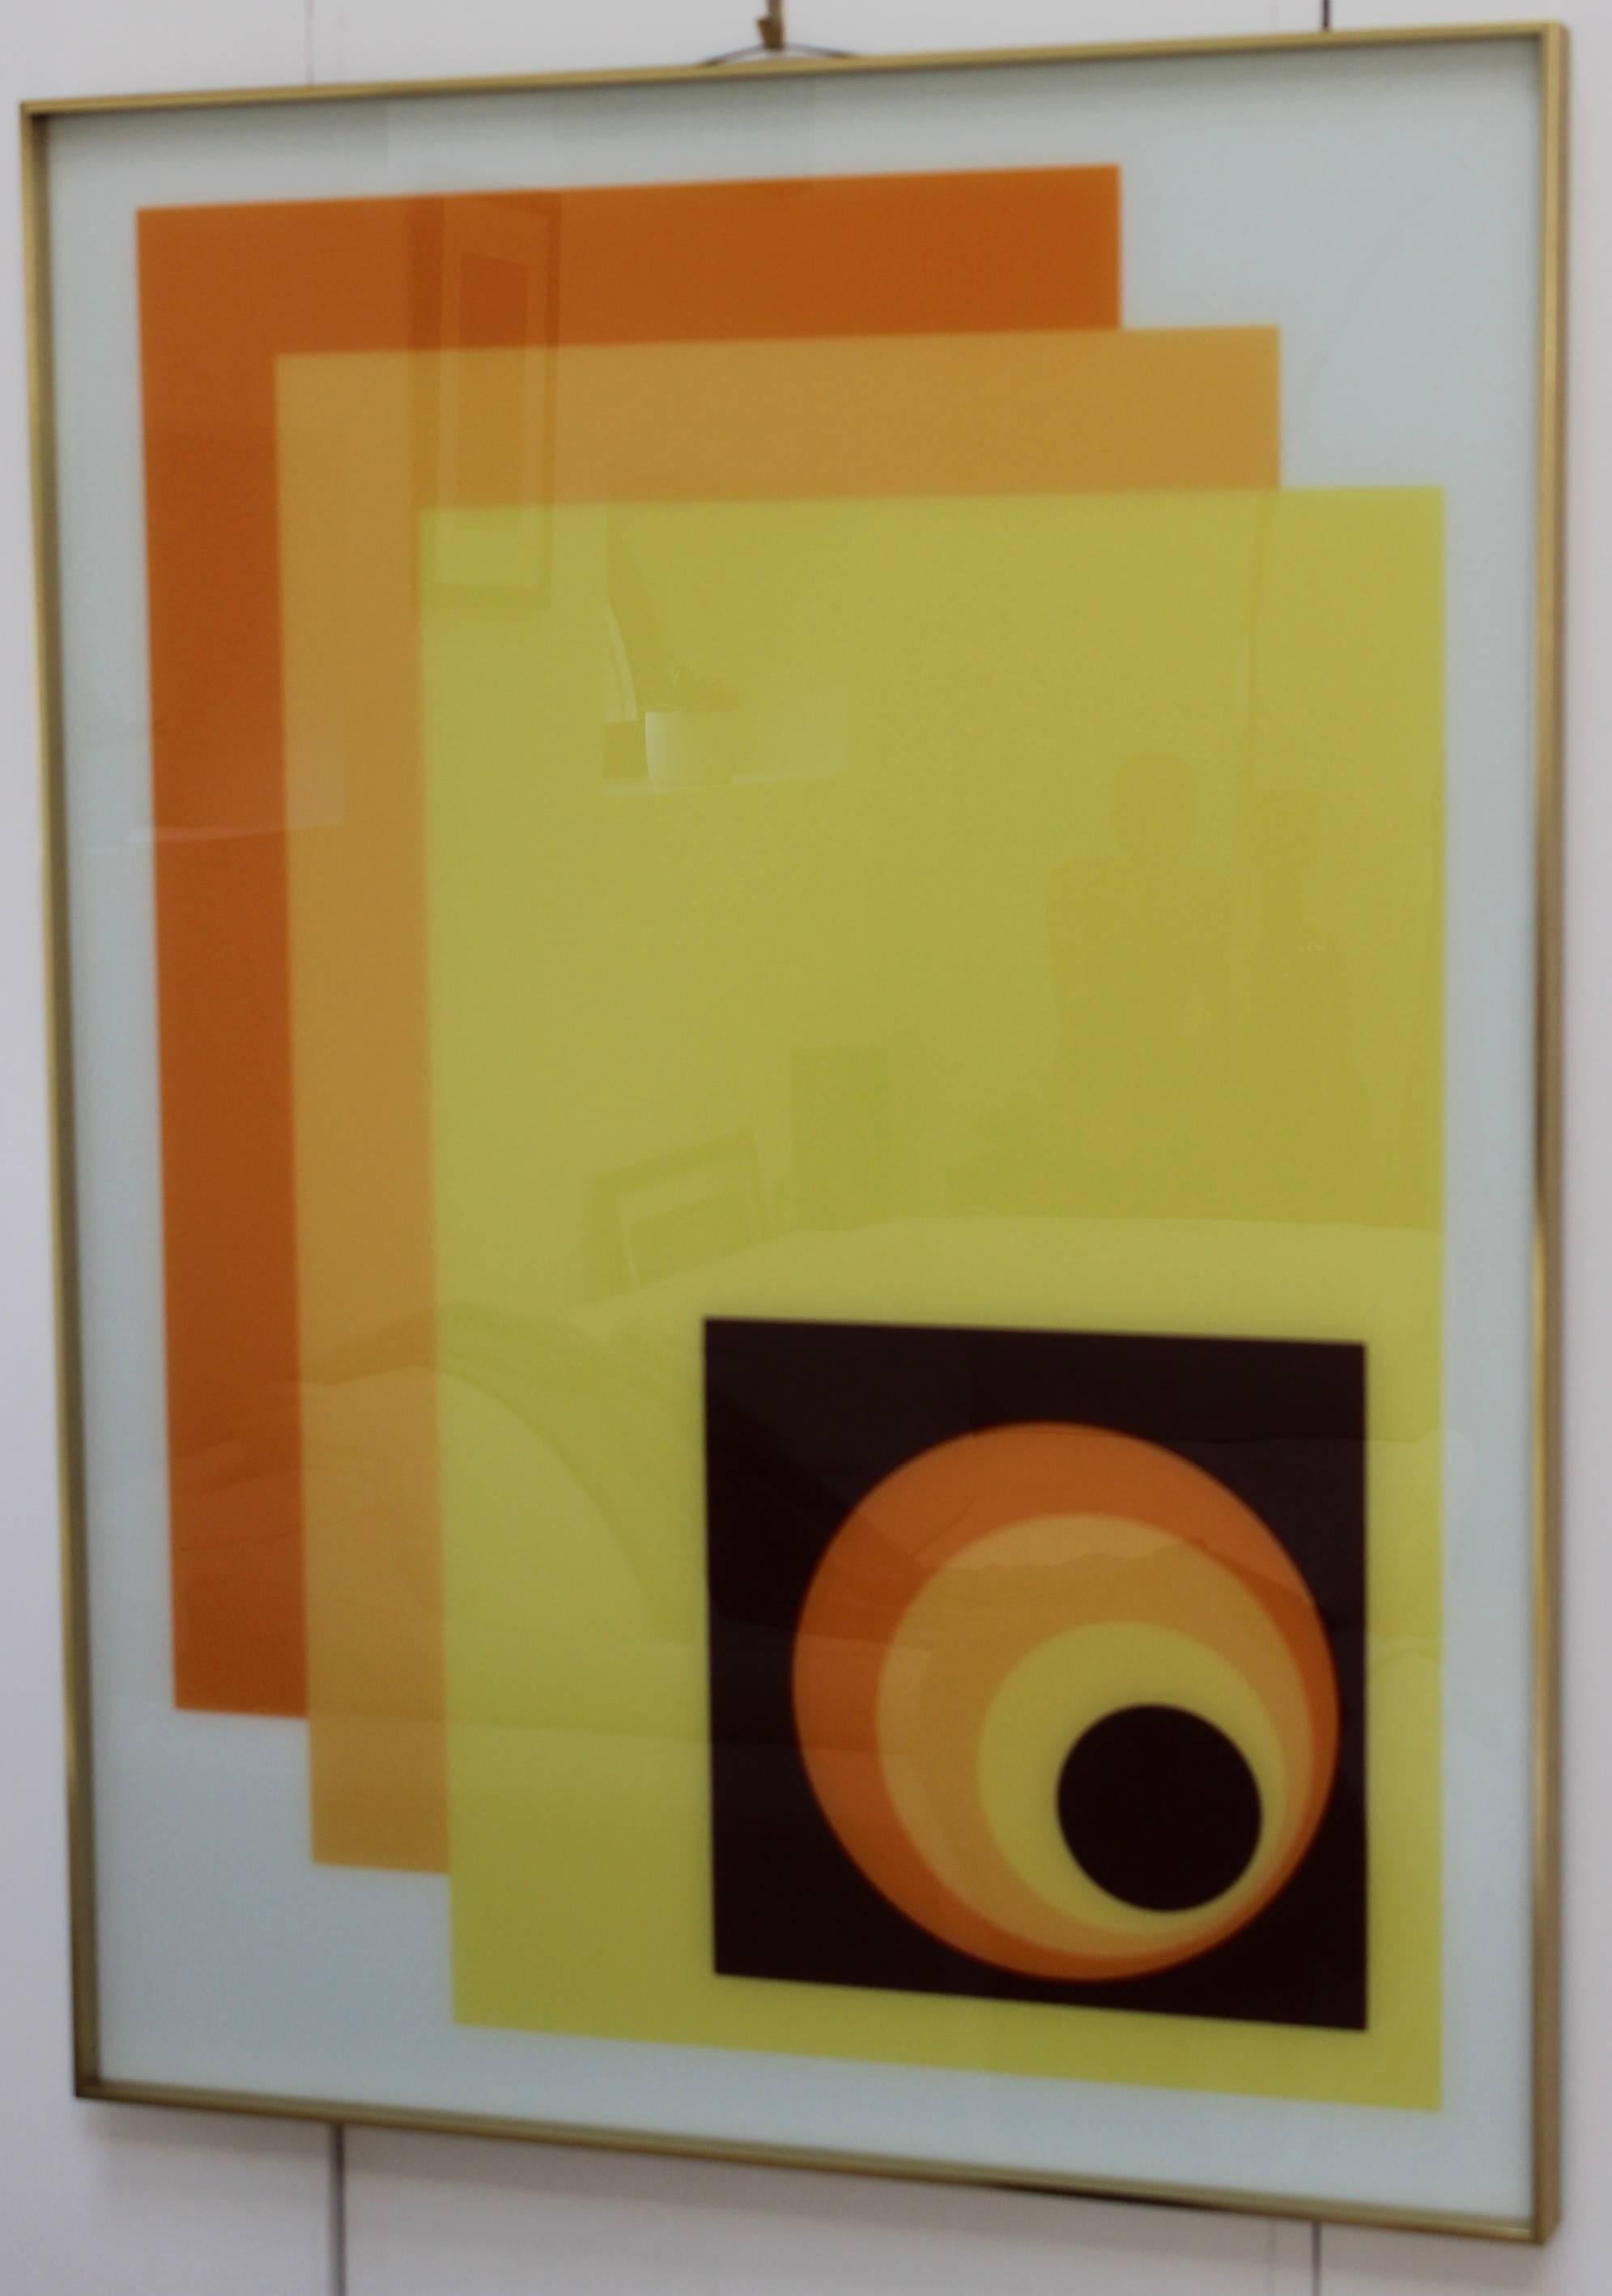 1970s modern Op wall art on glass by Turner with brass frame.

This piece can be hung vertically or horizontally.